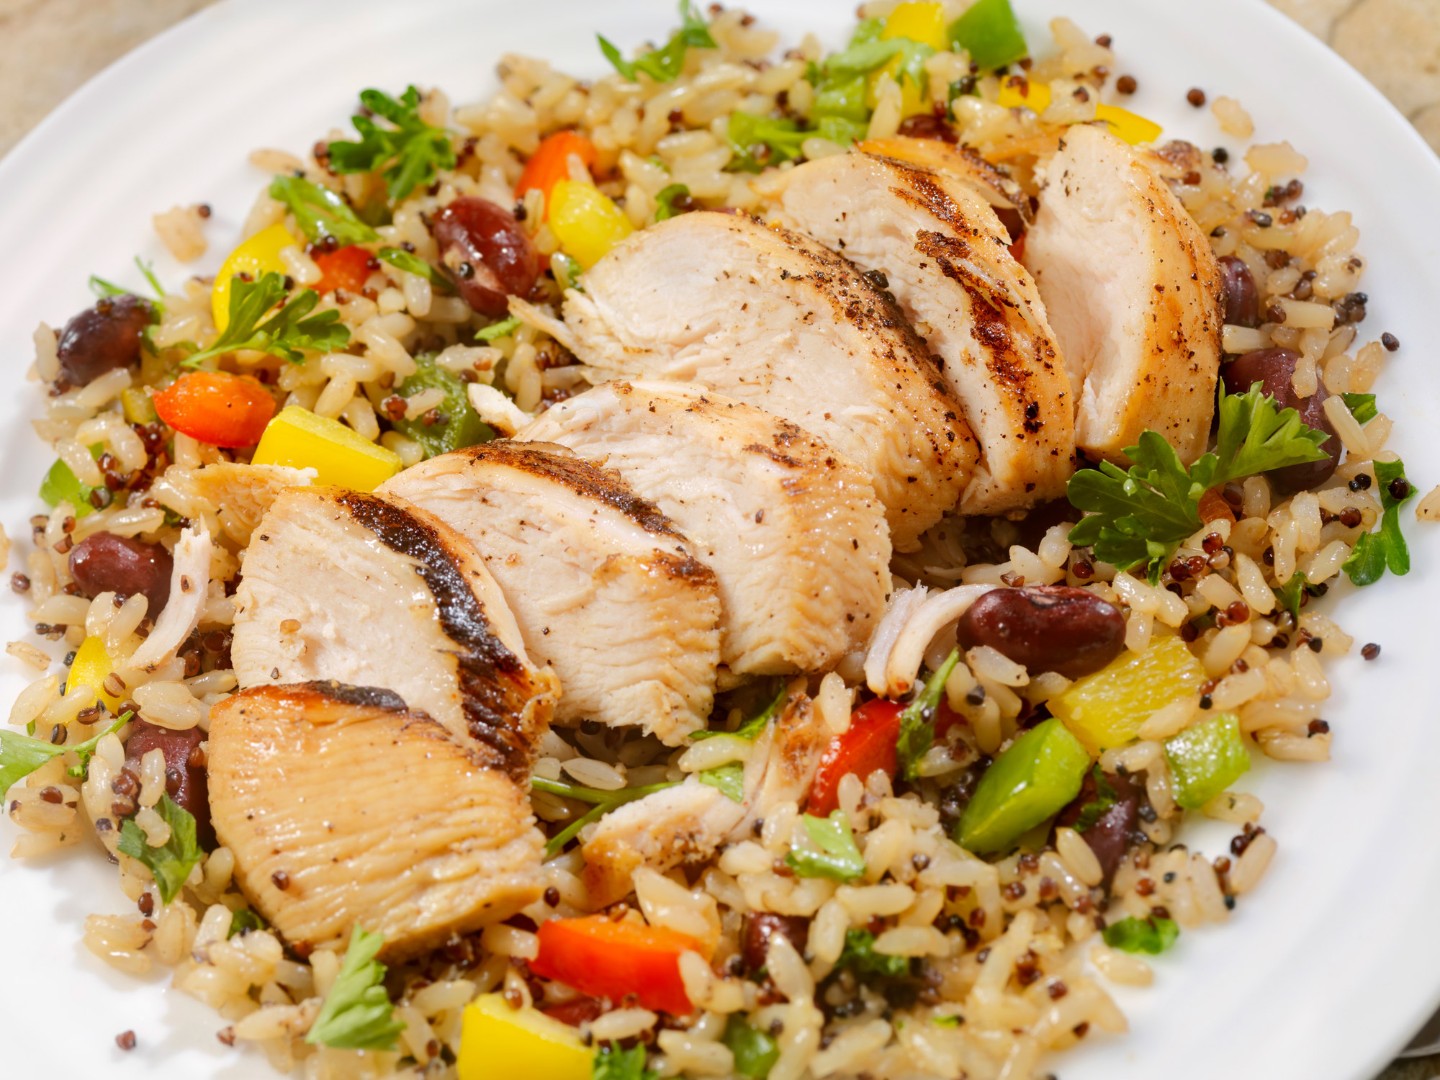 chicken and brown rice stir-fry||